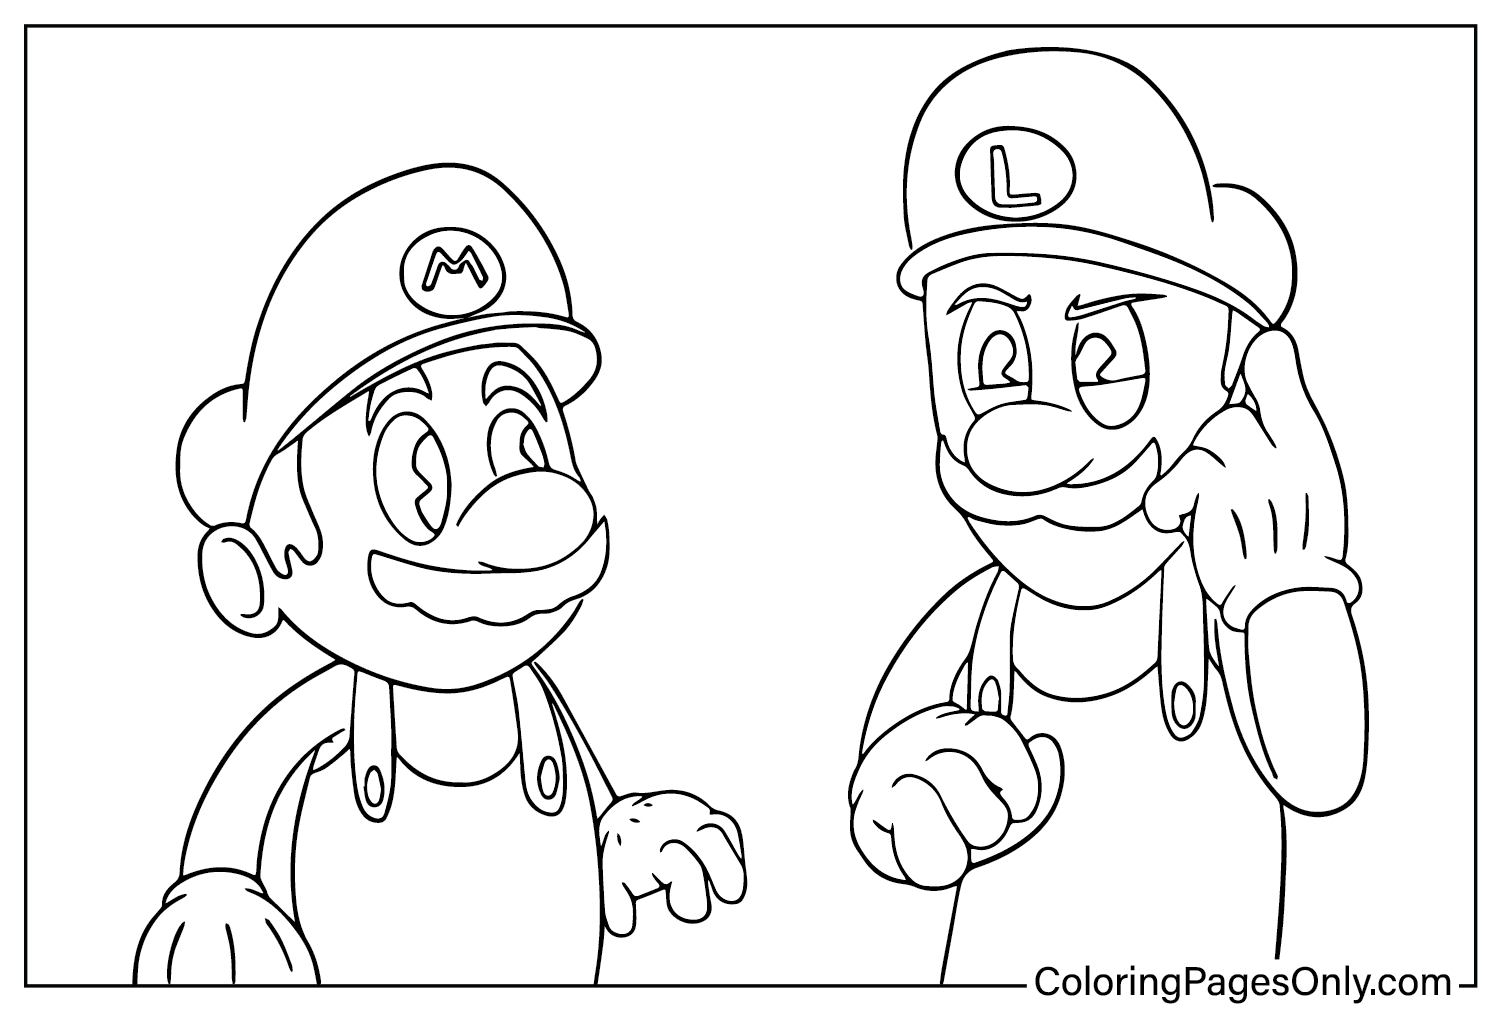 Super Mario Bros. Movie Coloring Page PNG - Free Printable Coloring Pages